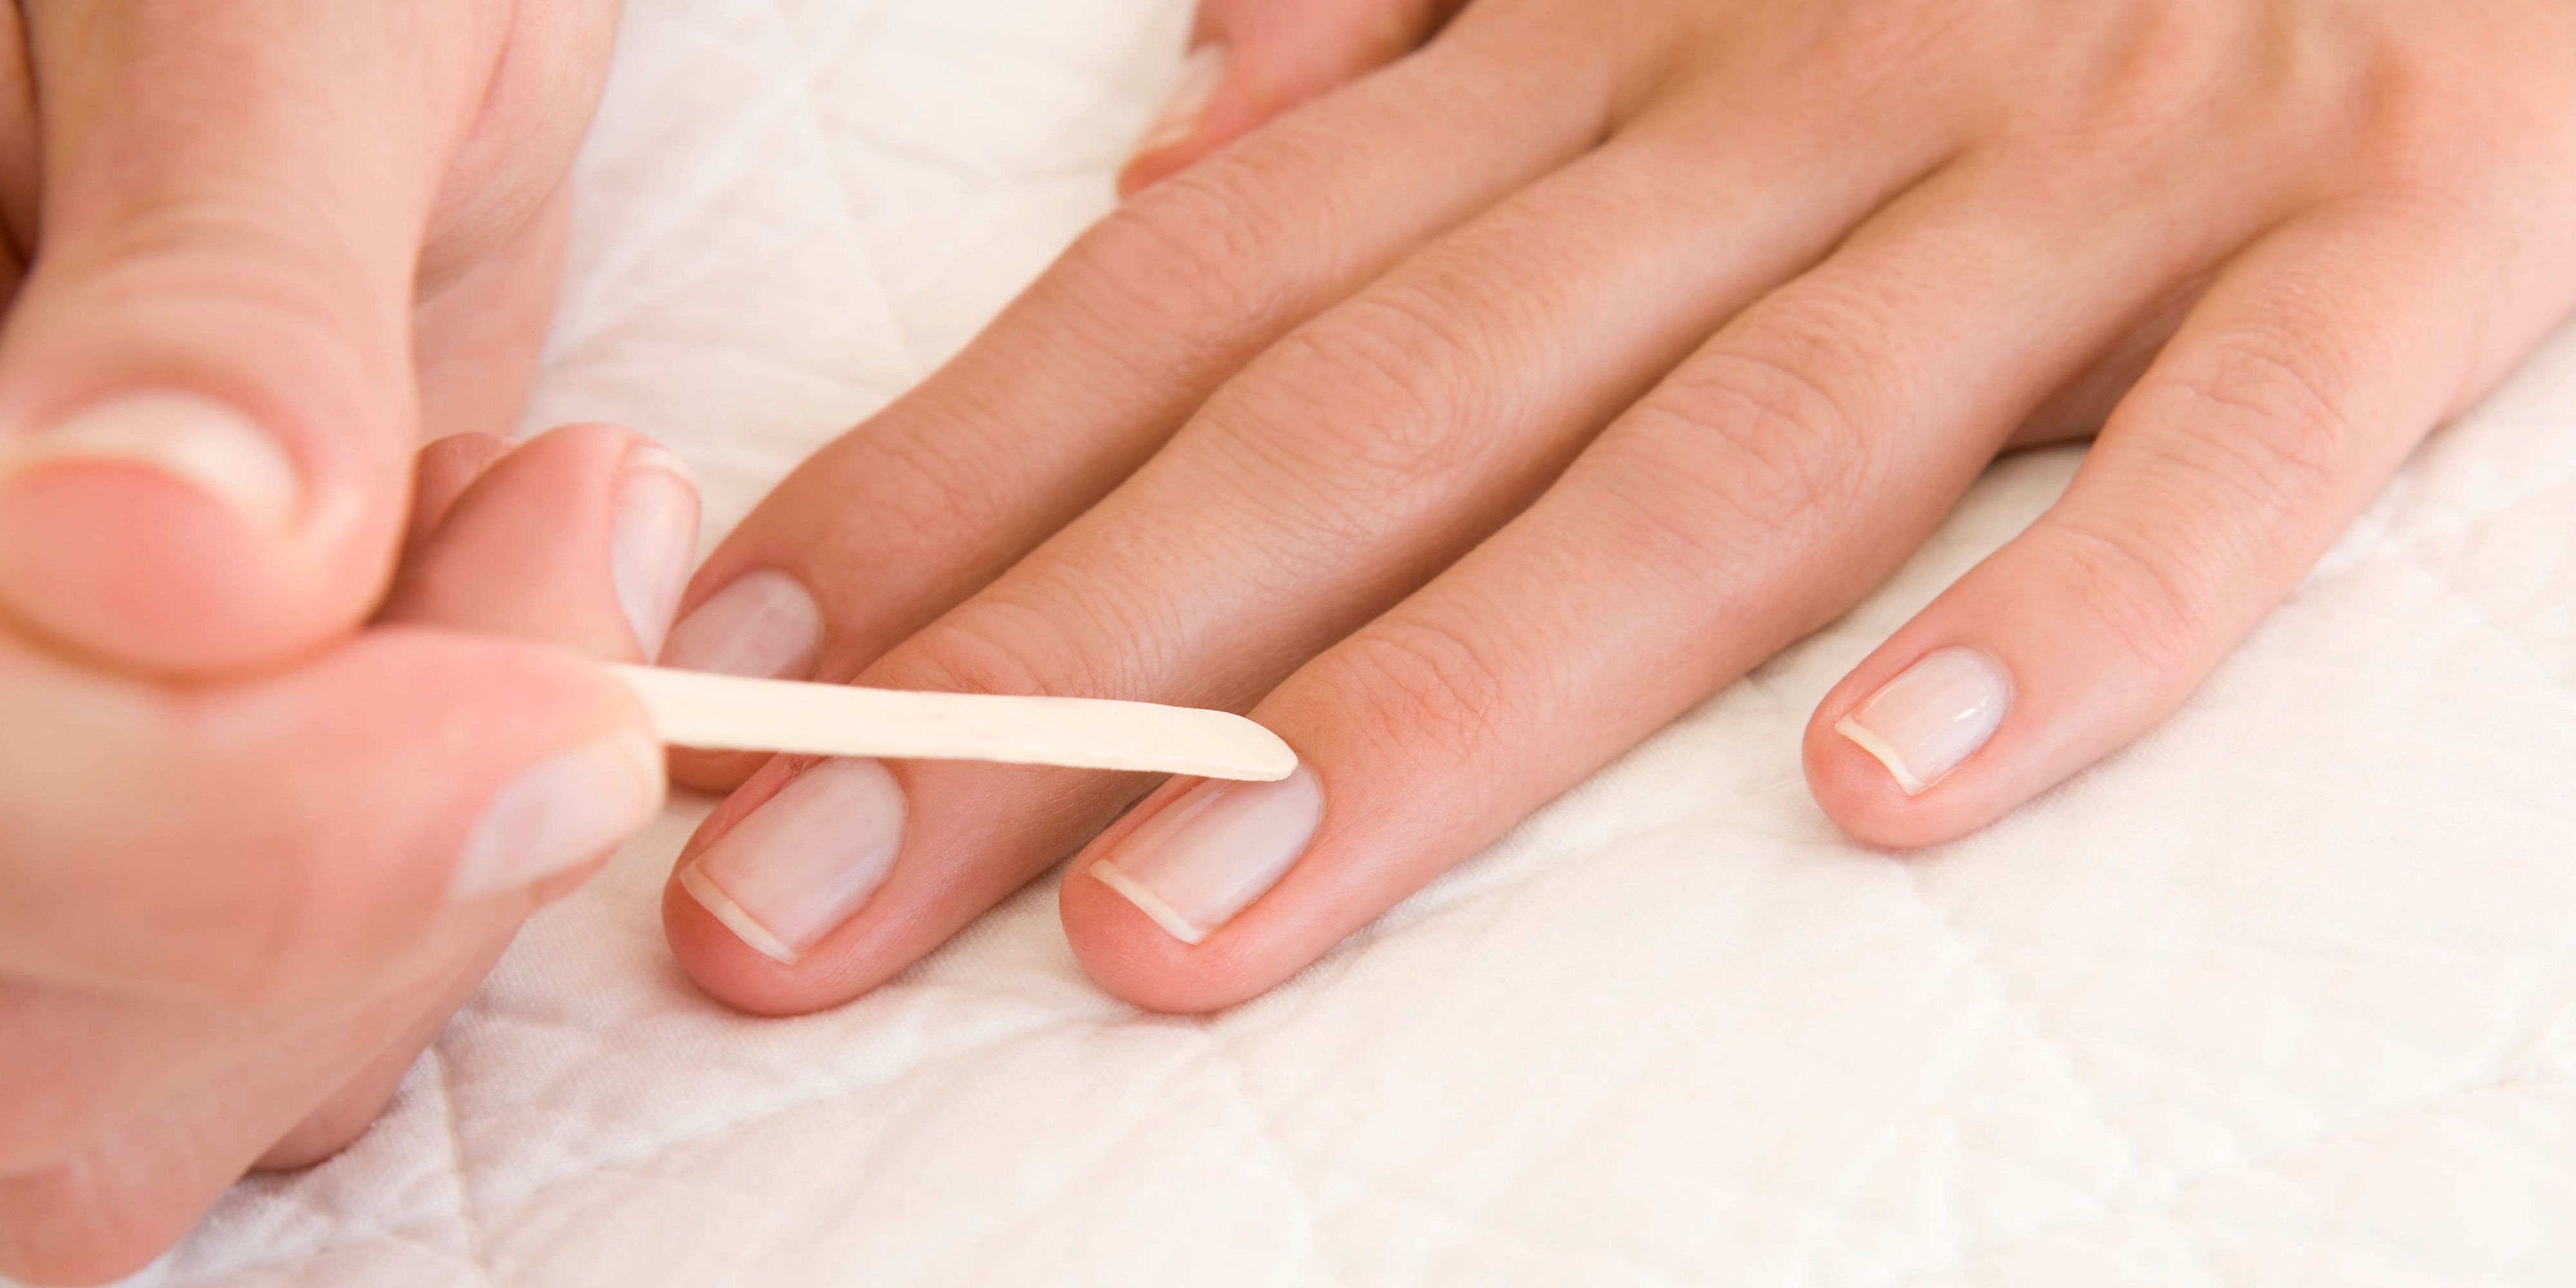 All Natural Nails - Your fingernails can reveal a lot about the state of  your health. Conditions ranging from stress to kidney and thyroid disease  can cause changes in your nails. One